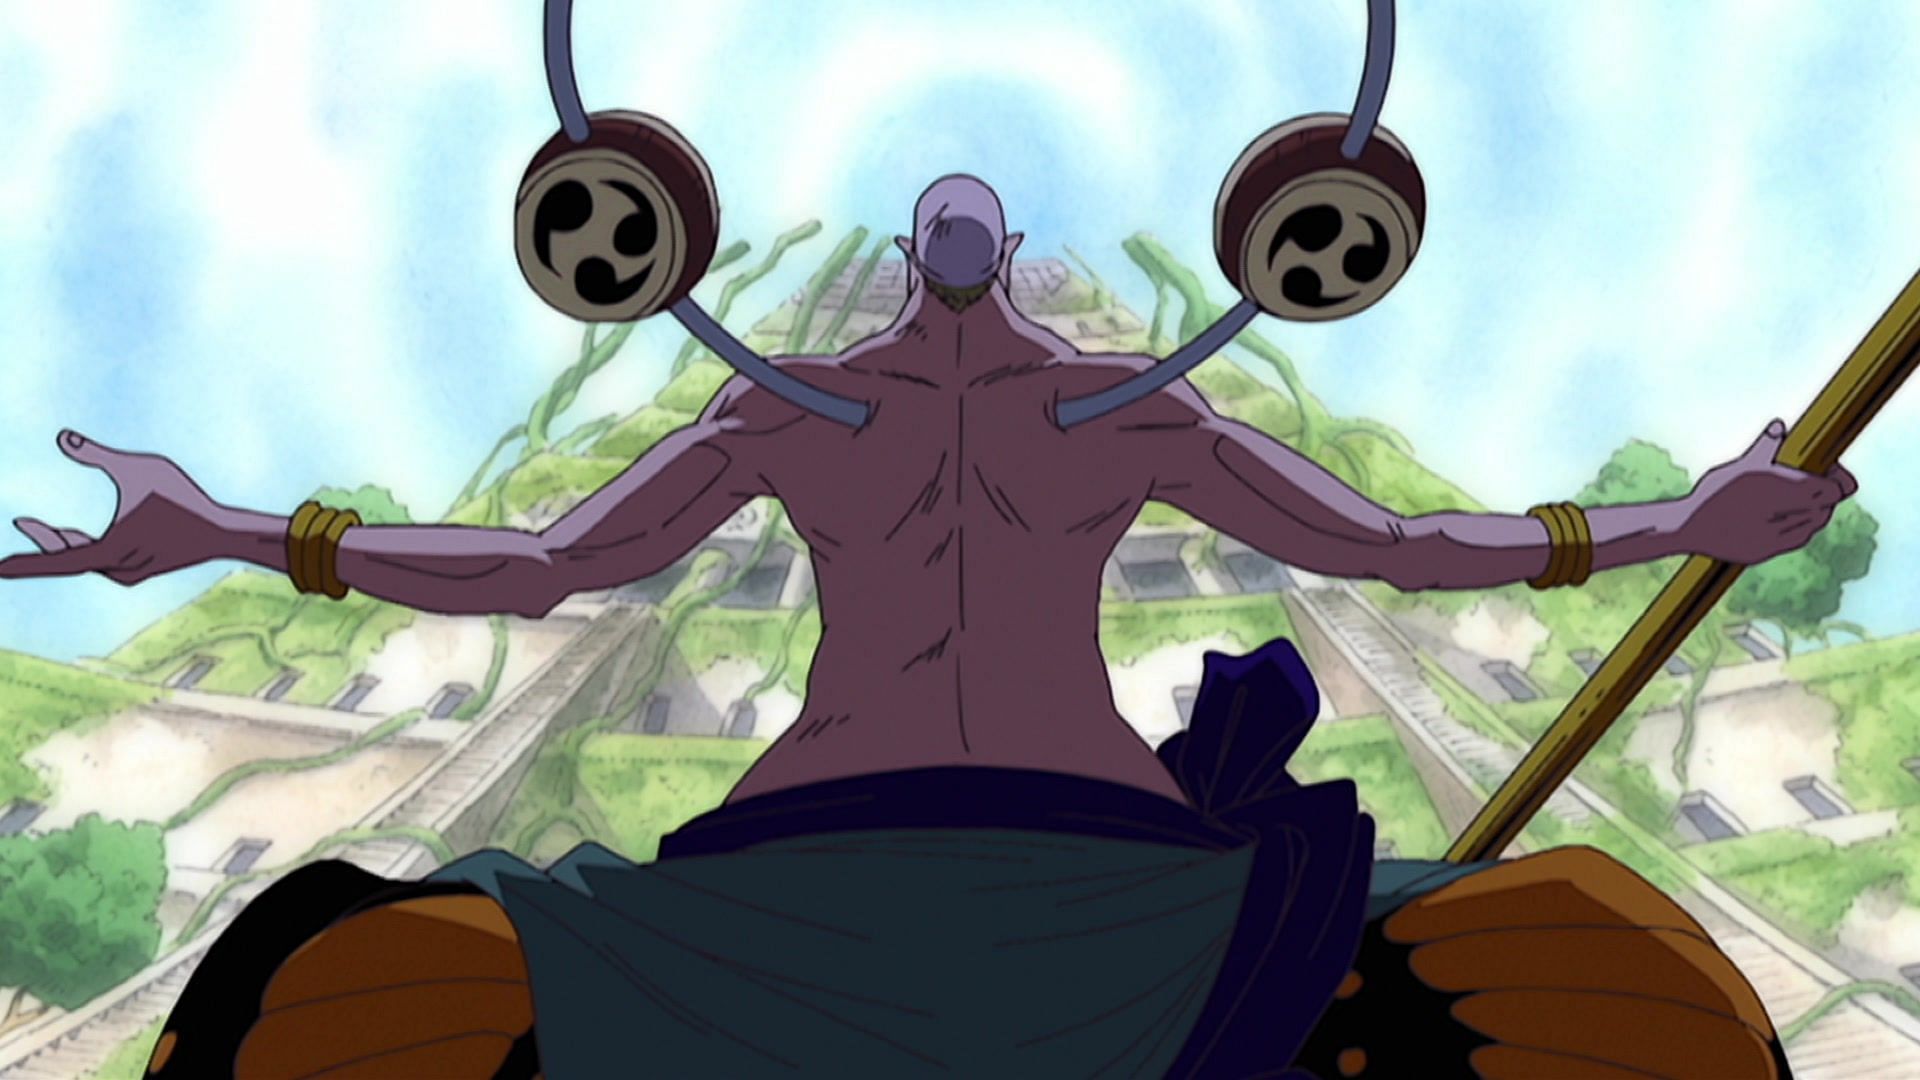 One Piece Special Edition (HD, Subtitled): Sky Island (136-206) An